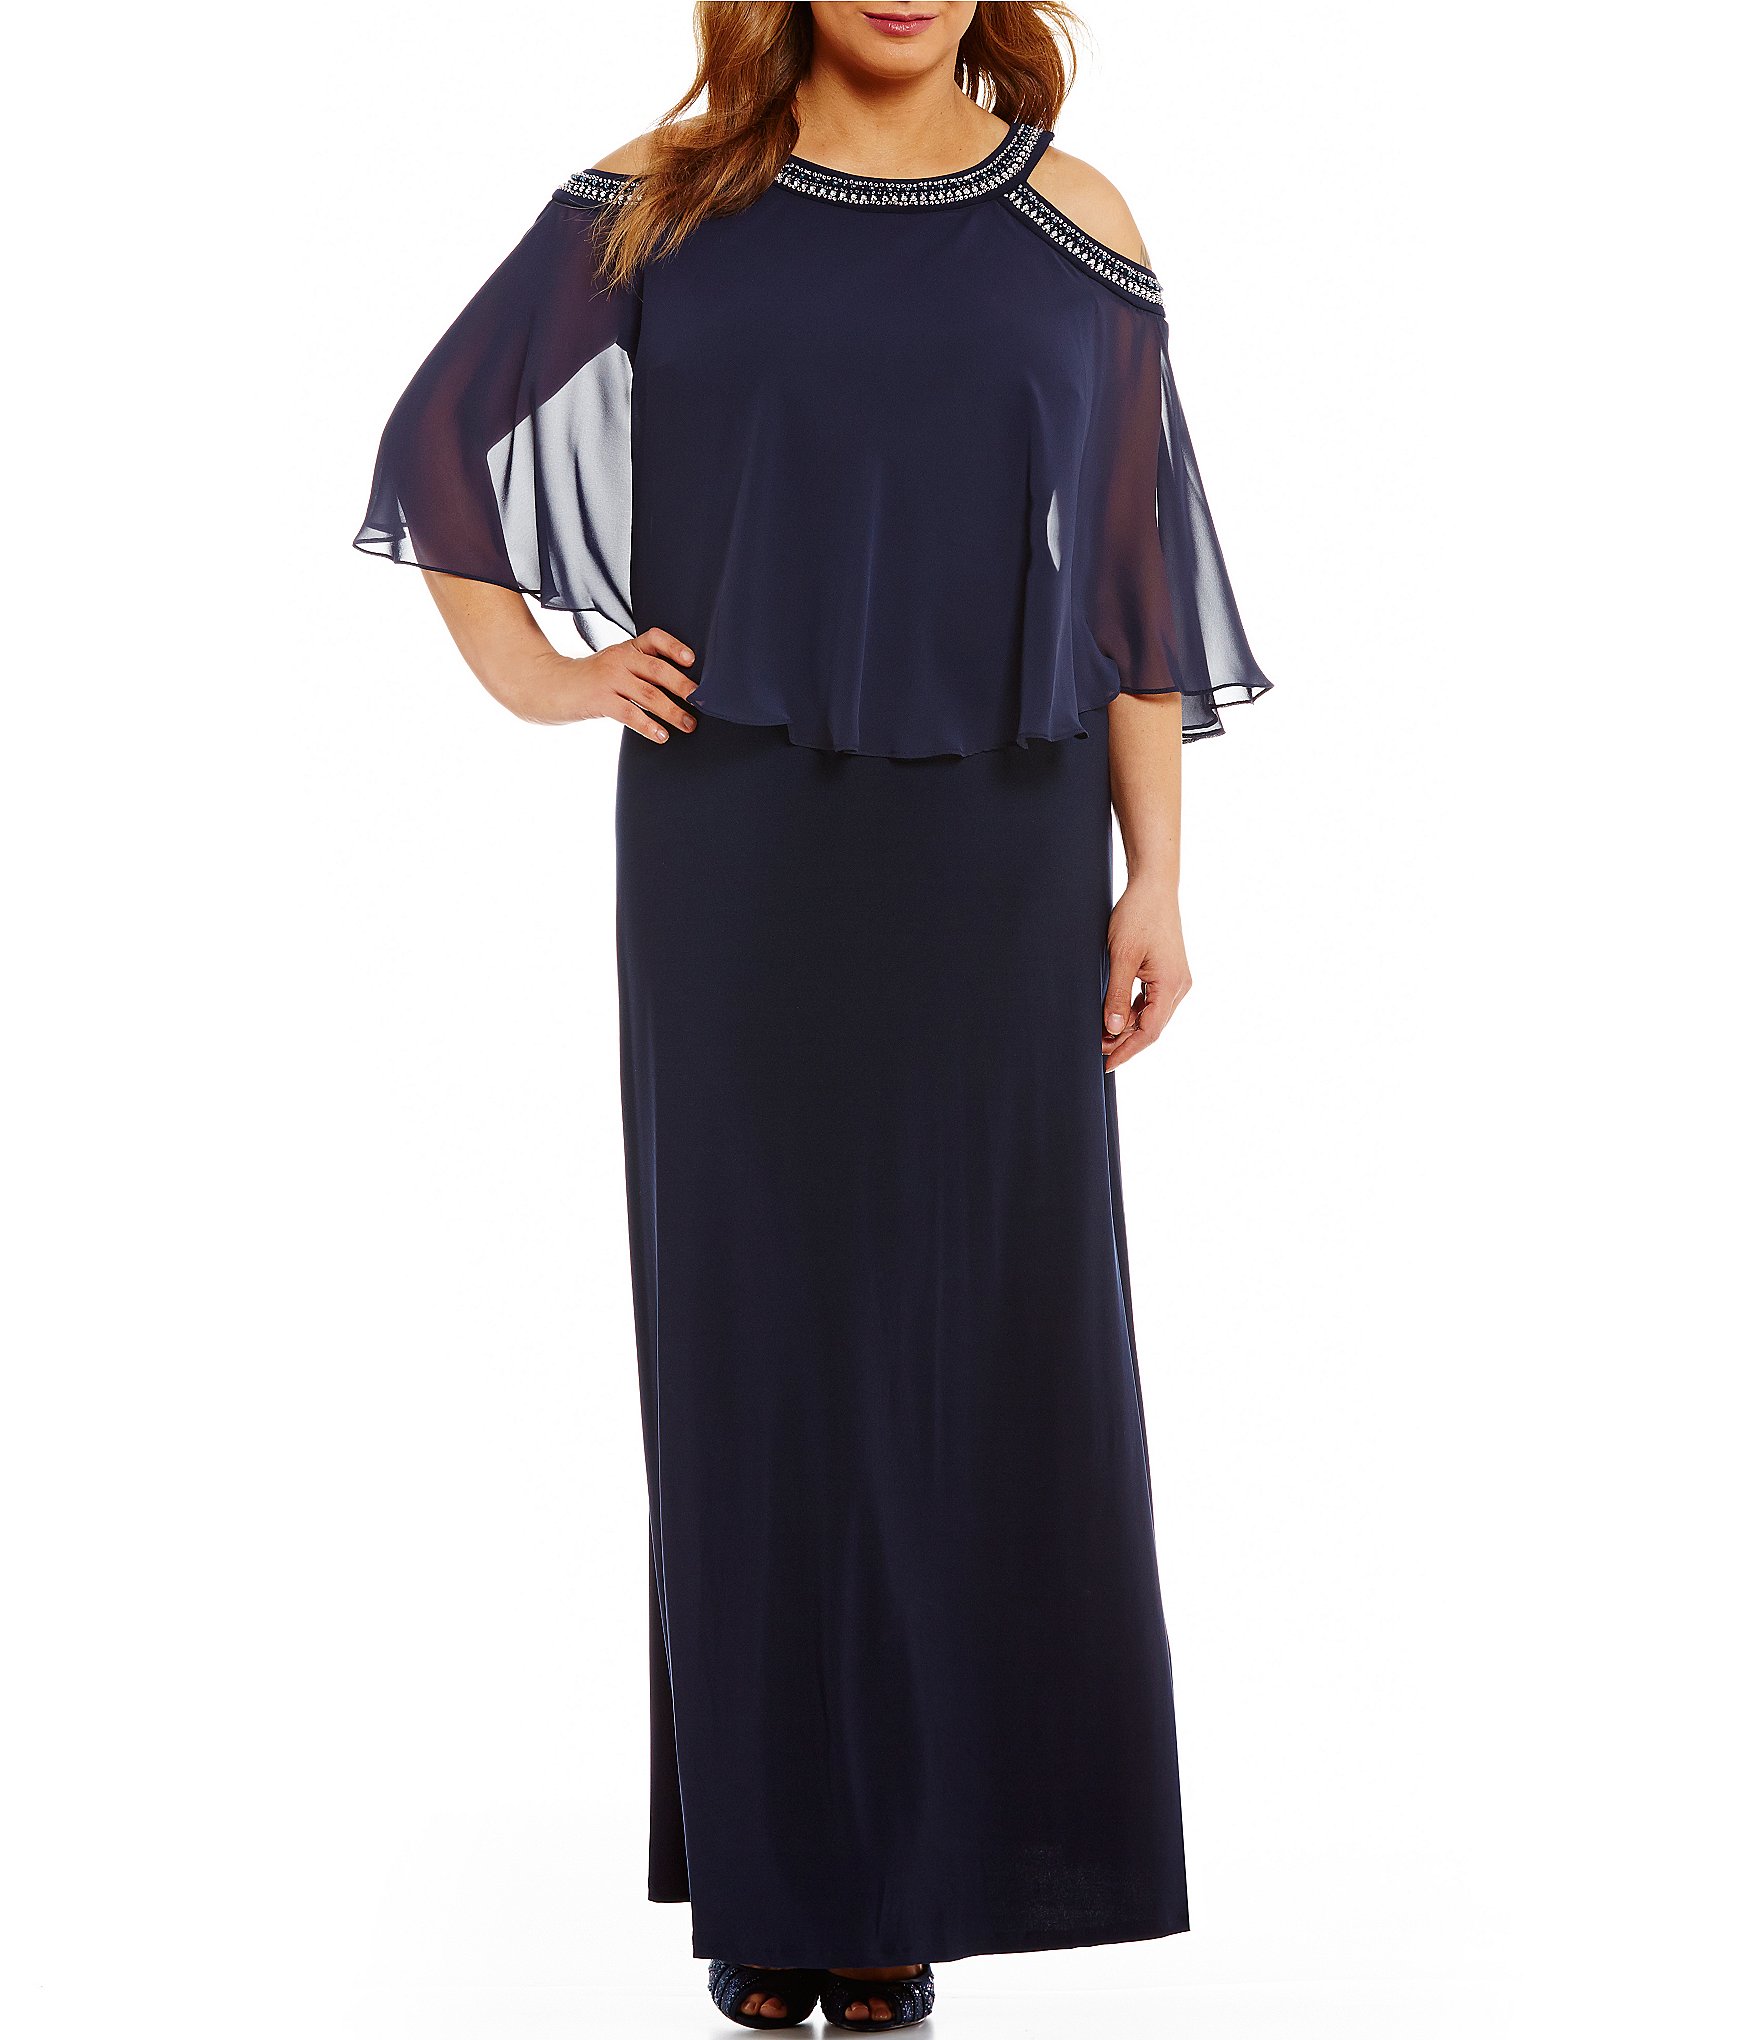 plus size navy blue and yellow dress